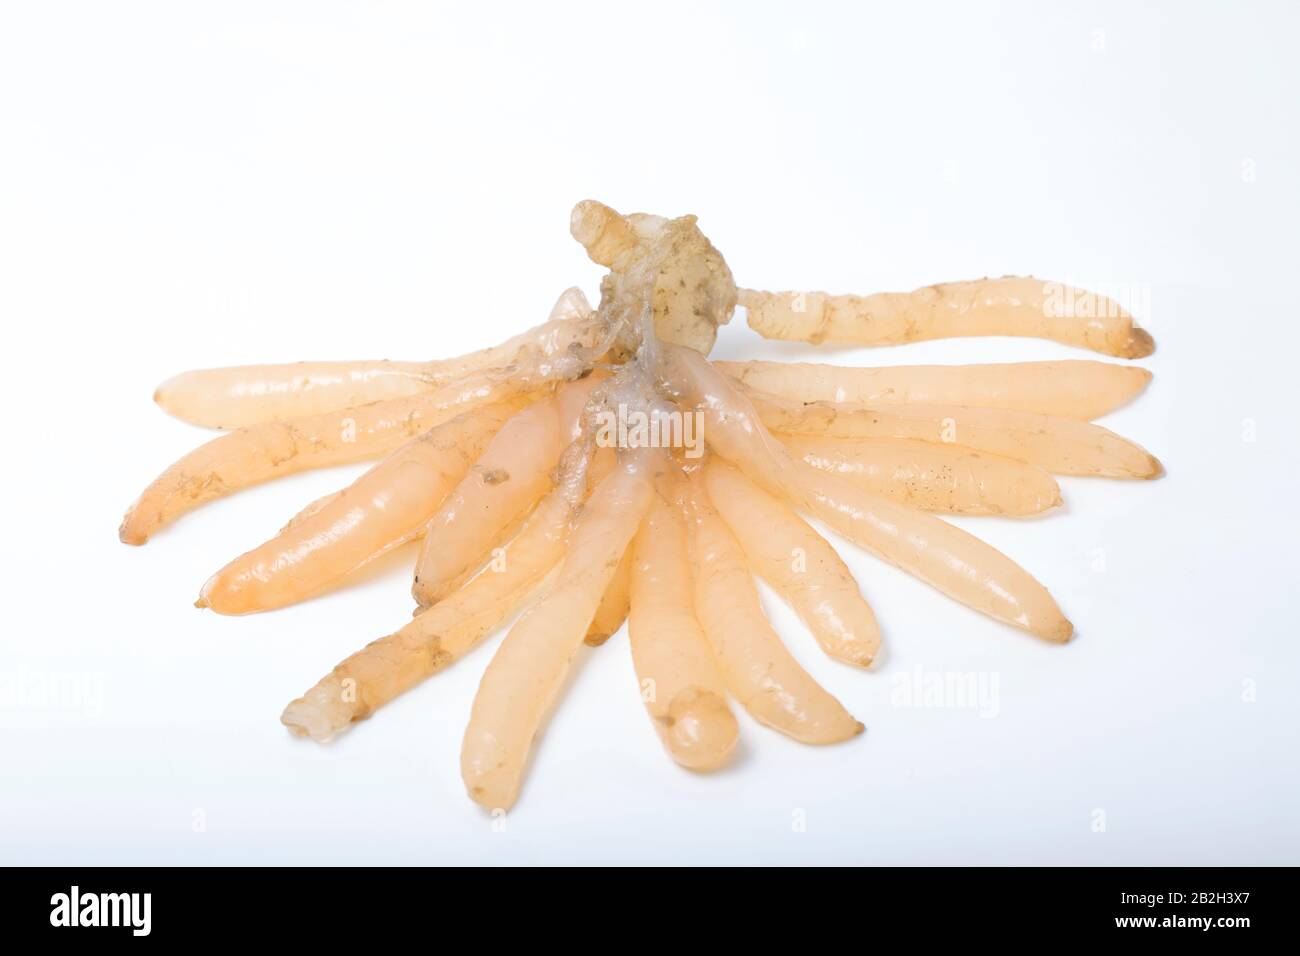 A clump of squid eggs found washed ashore while beachcombing on a sandy beach in Dorset. White background. Dorset England UK GB Stock Photo